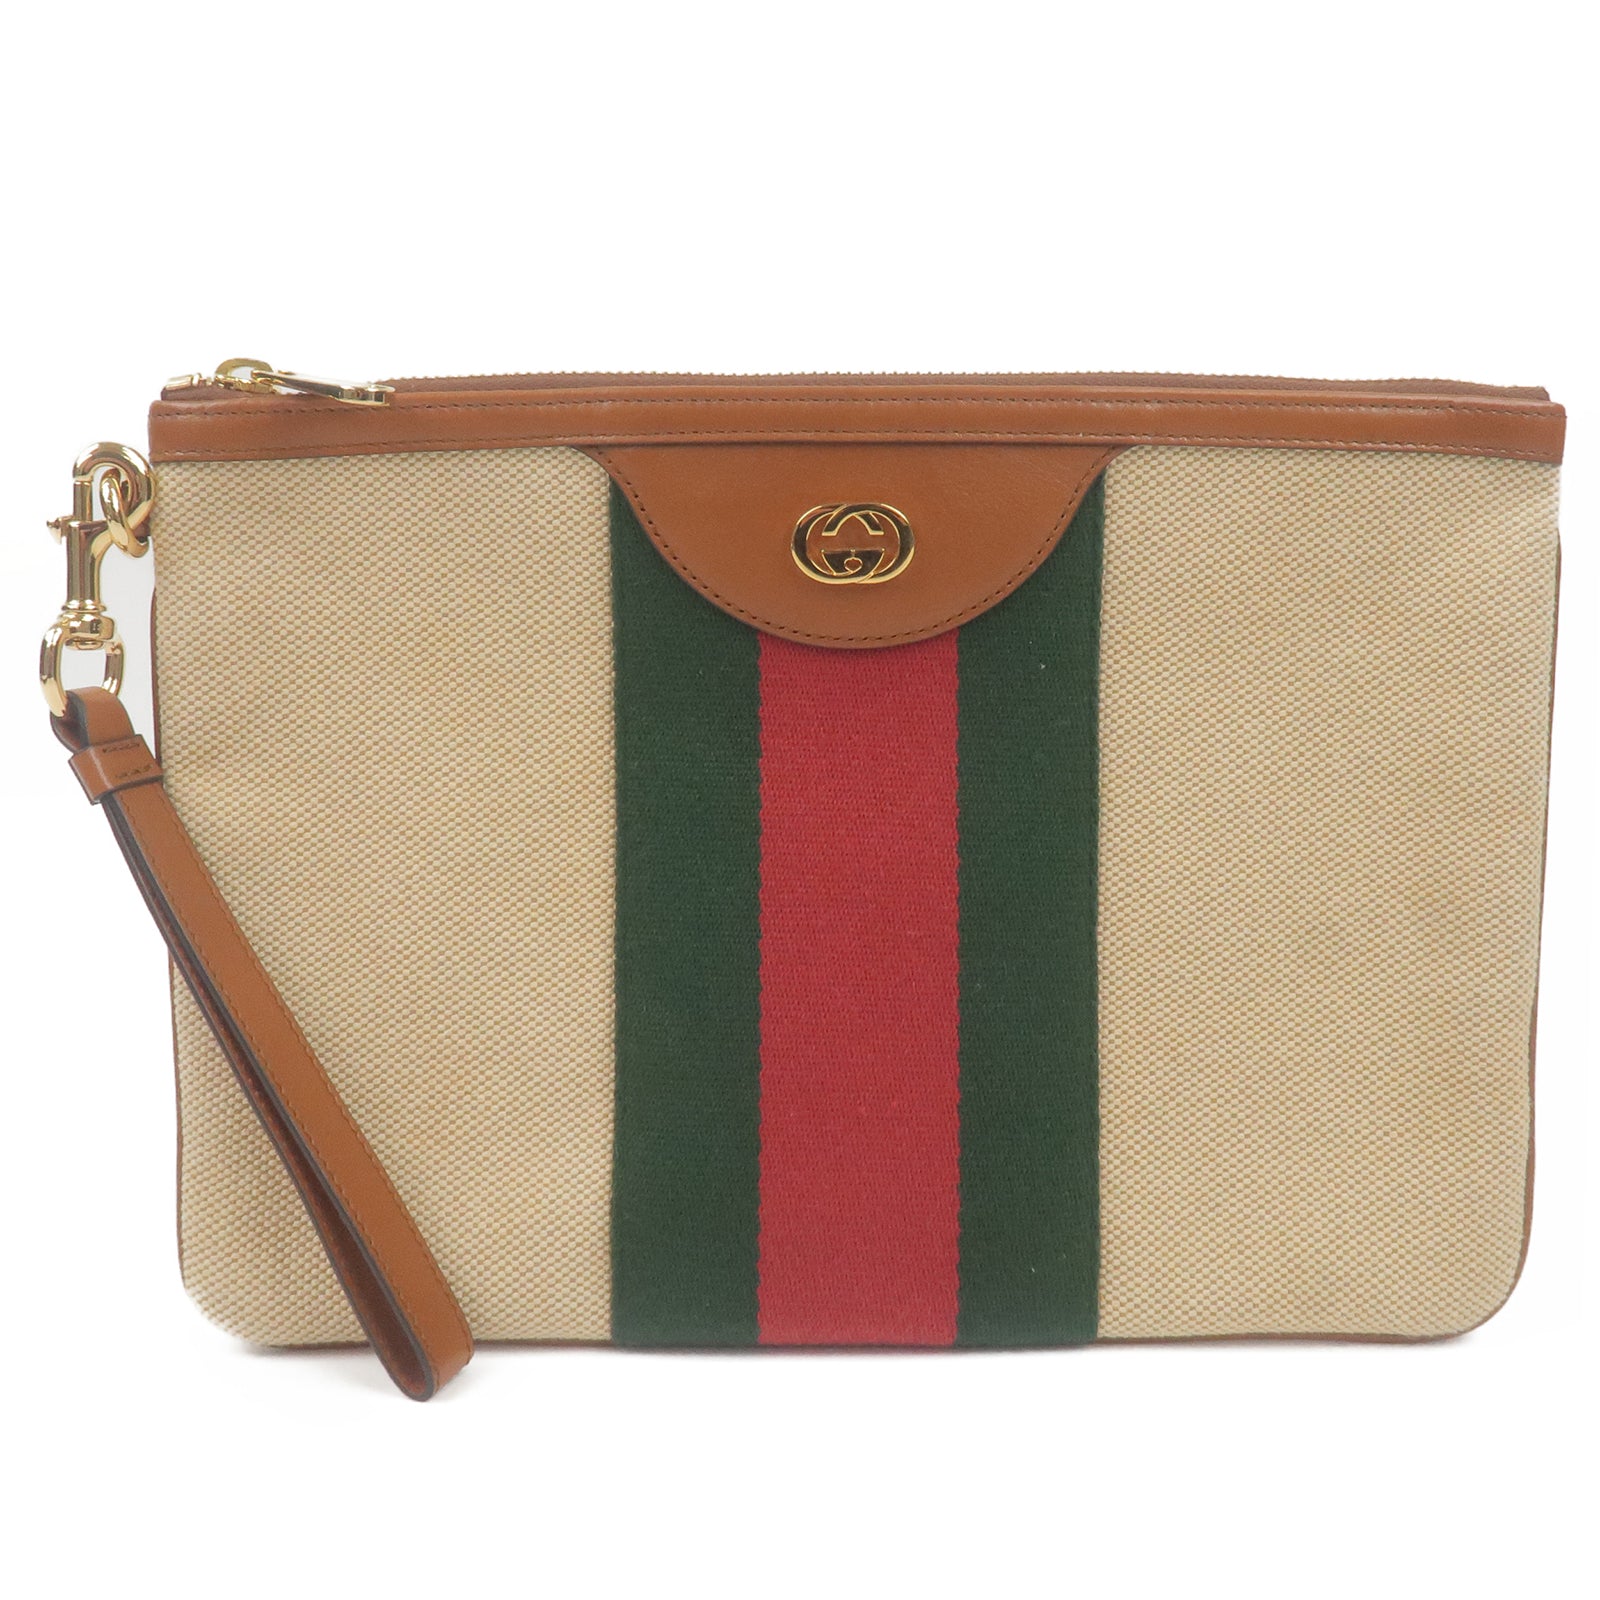 GUCCI-Sherry-Canvas-Leather-Clutch-Bag-Pouch-Beige-Brown-576053